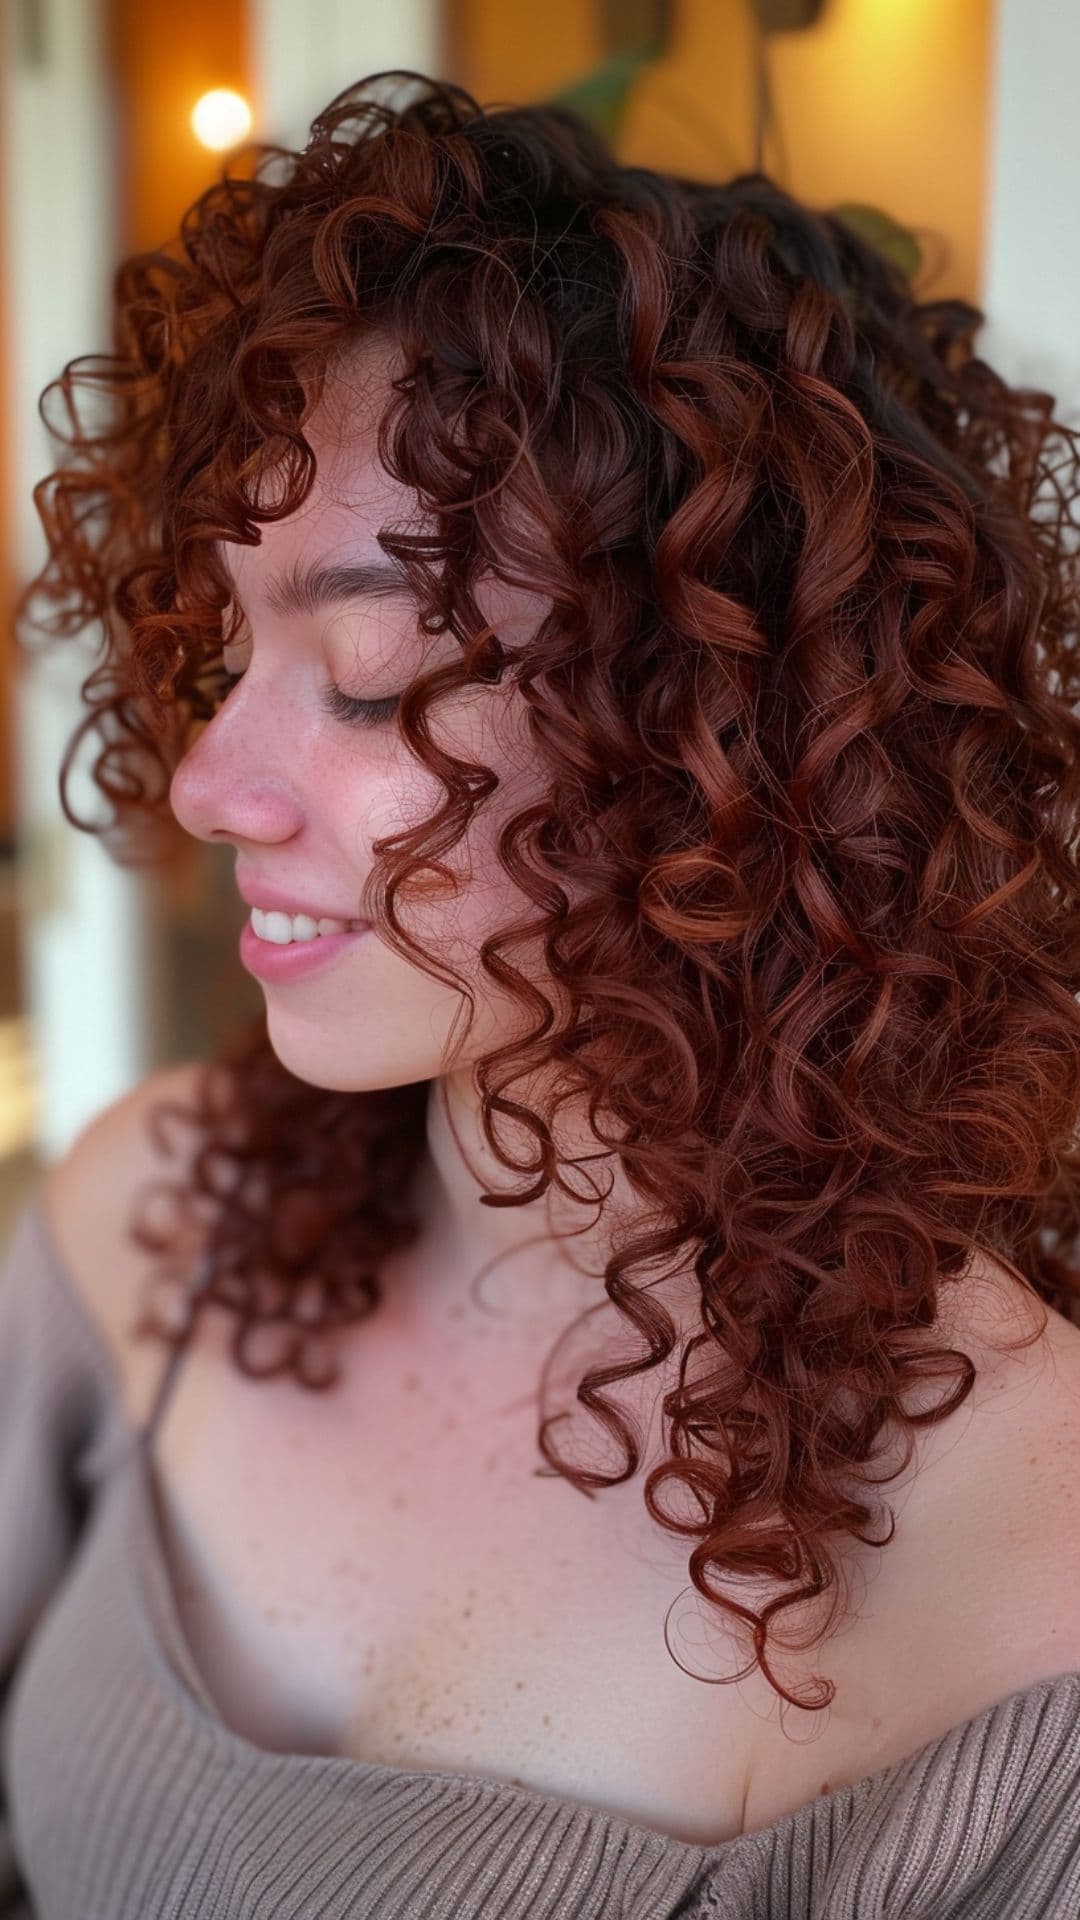 A woman modelling a cherry cola curly hair.